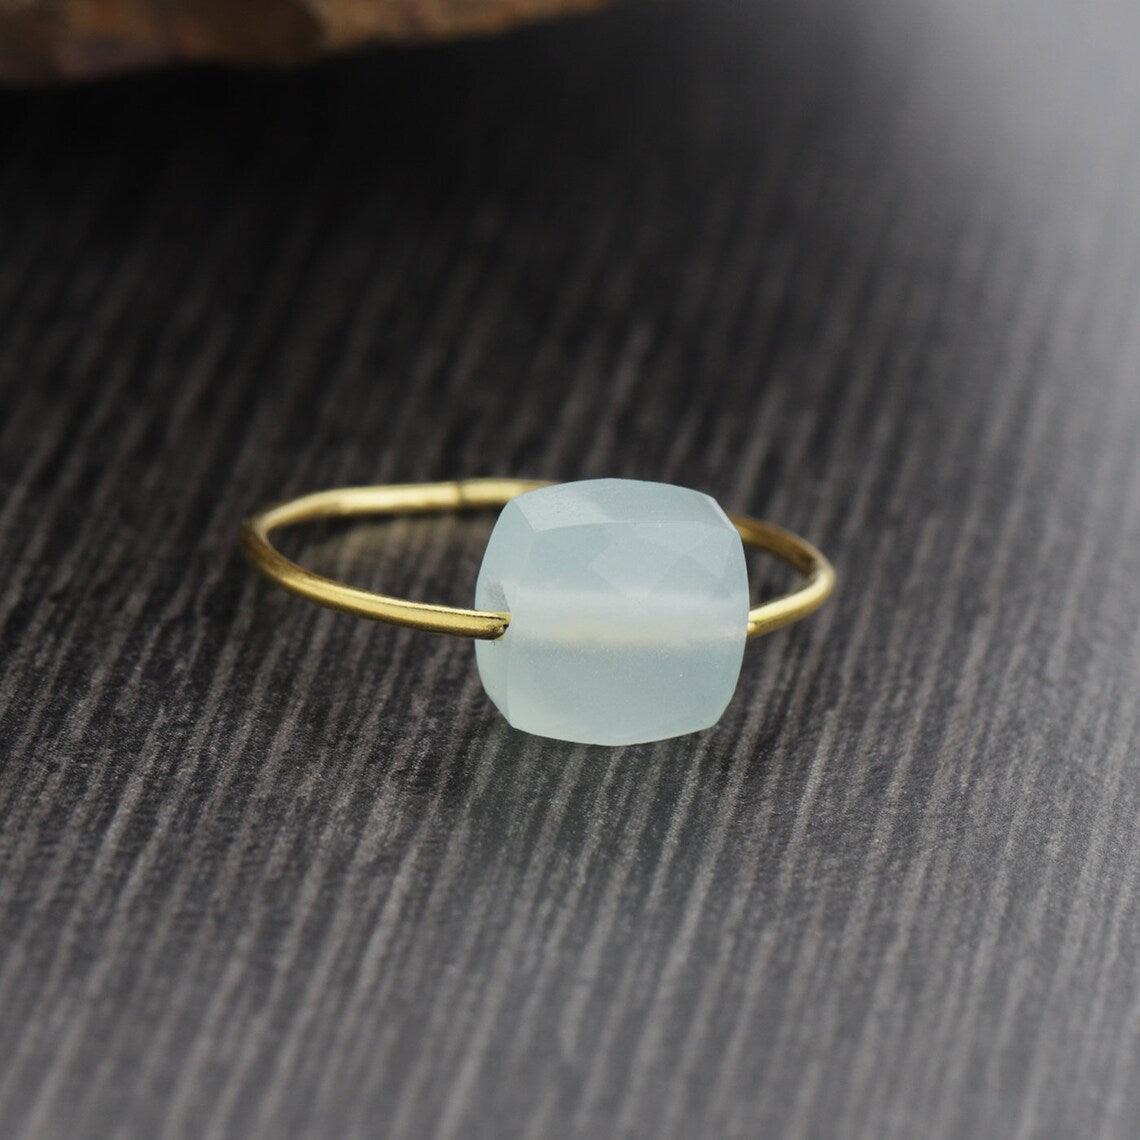 Aqua Chalcedony Gold Plating on 925 Sterling Silver Ring, Cushion Gemstone Ring, Gold Plated Ring, Aqua Ring, Stacking Ring, Delicate Ring, Minimalist Ring, Minimalist Ring